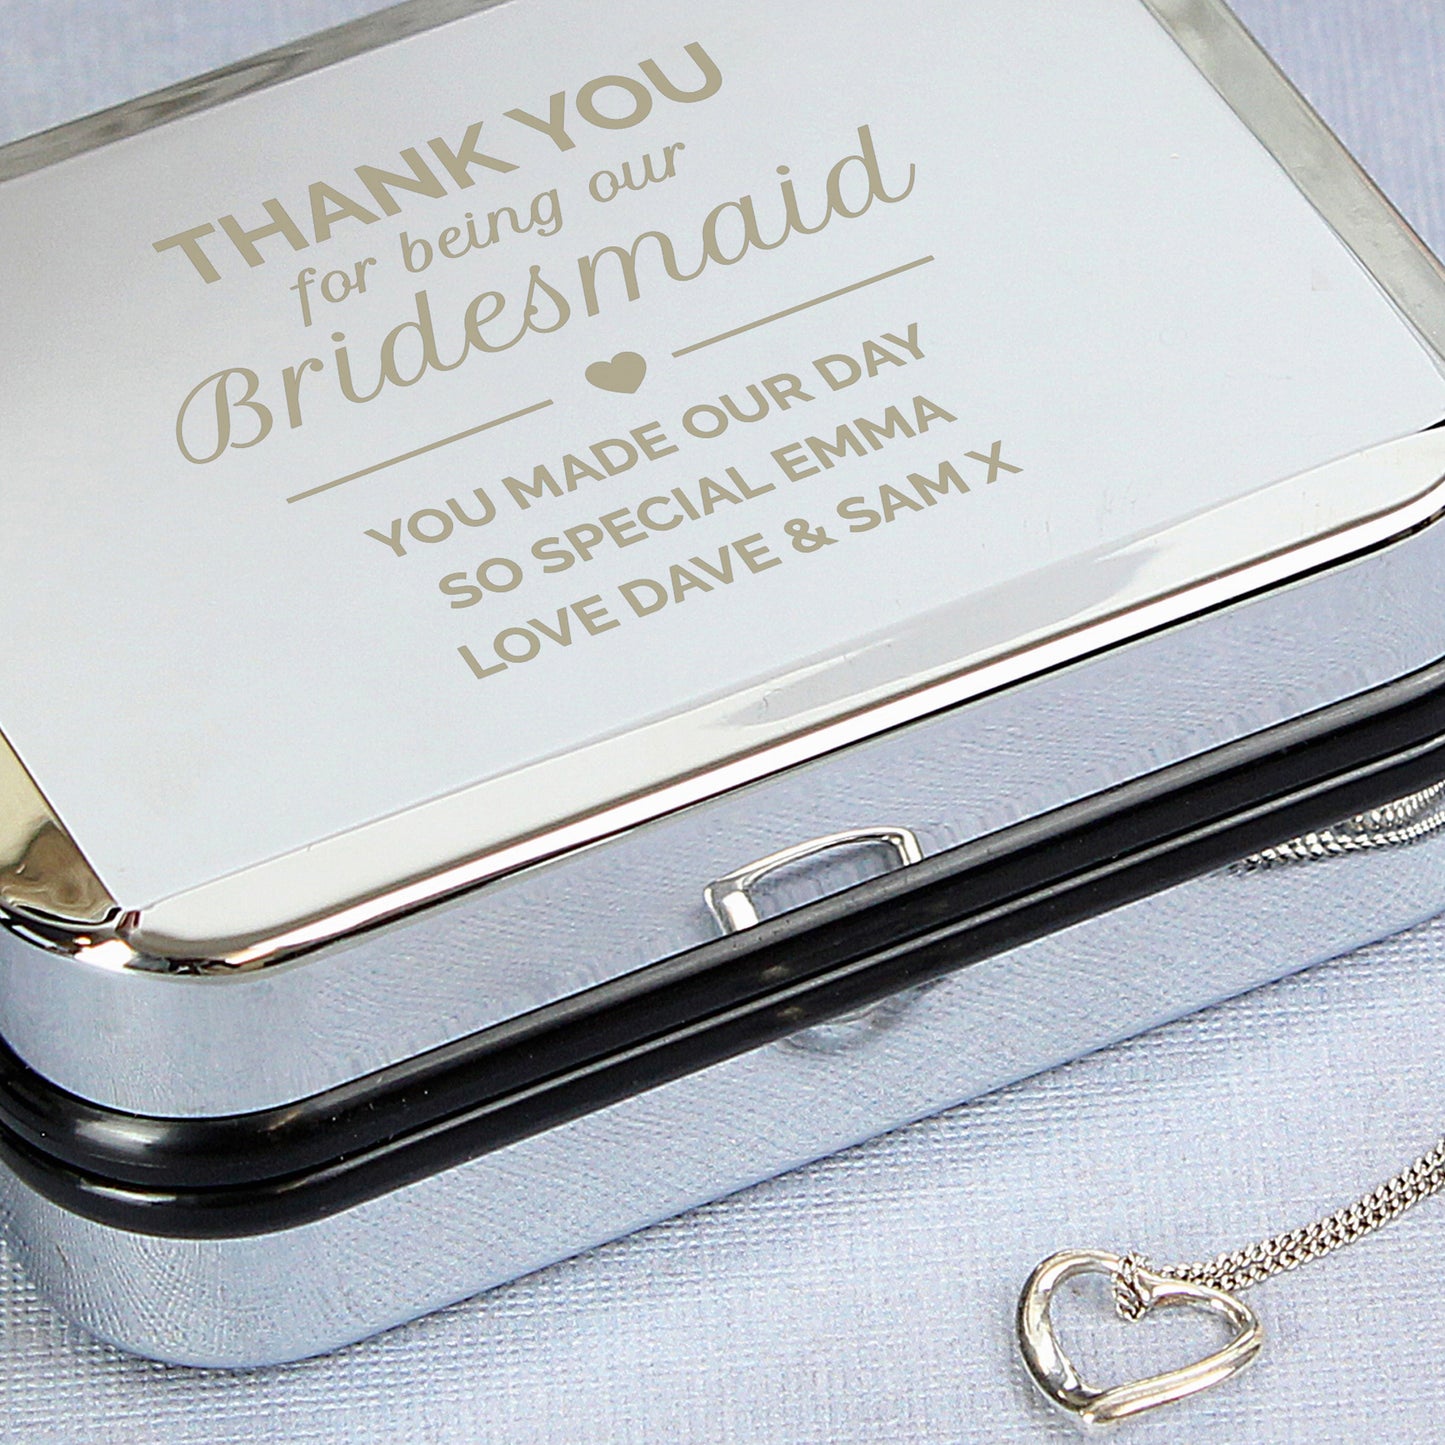 Personalised Bridesmaid Box and Heart Necklace - Personalise It!